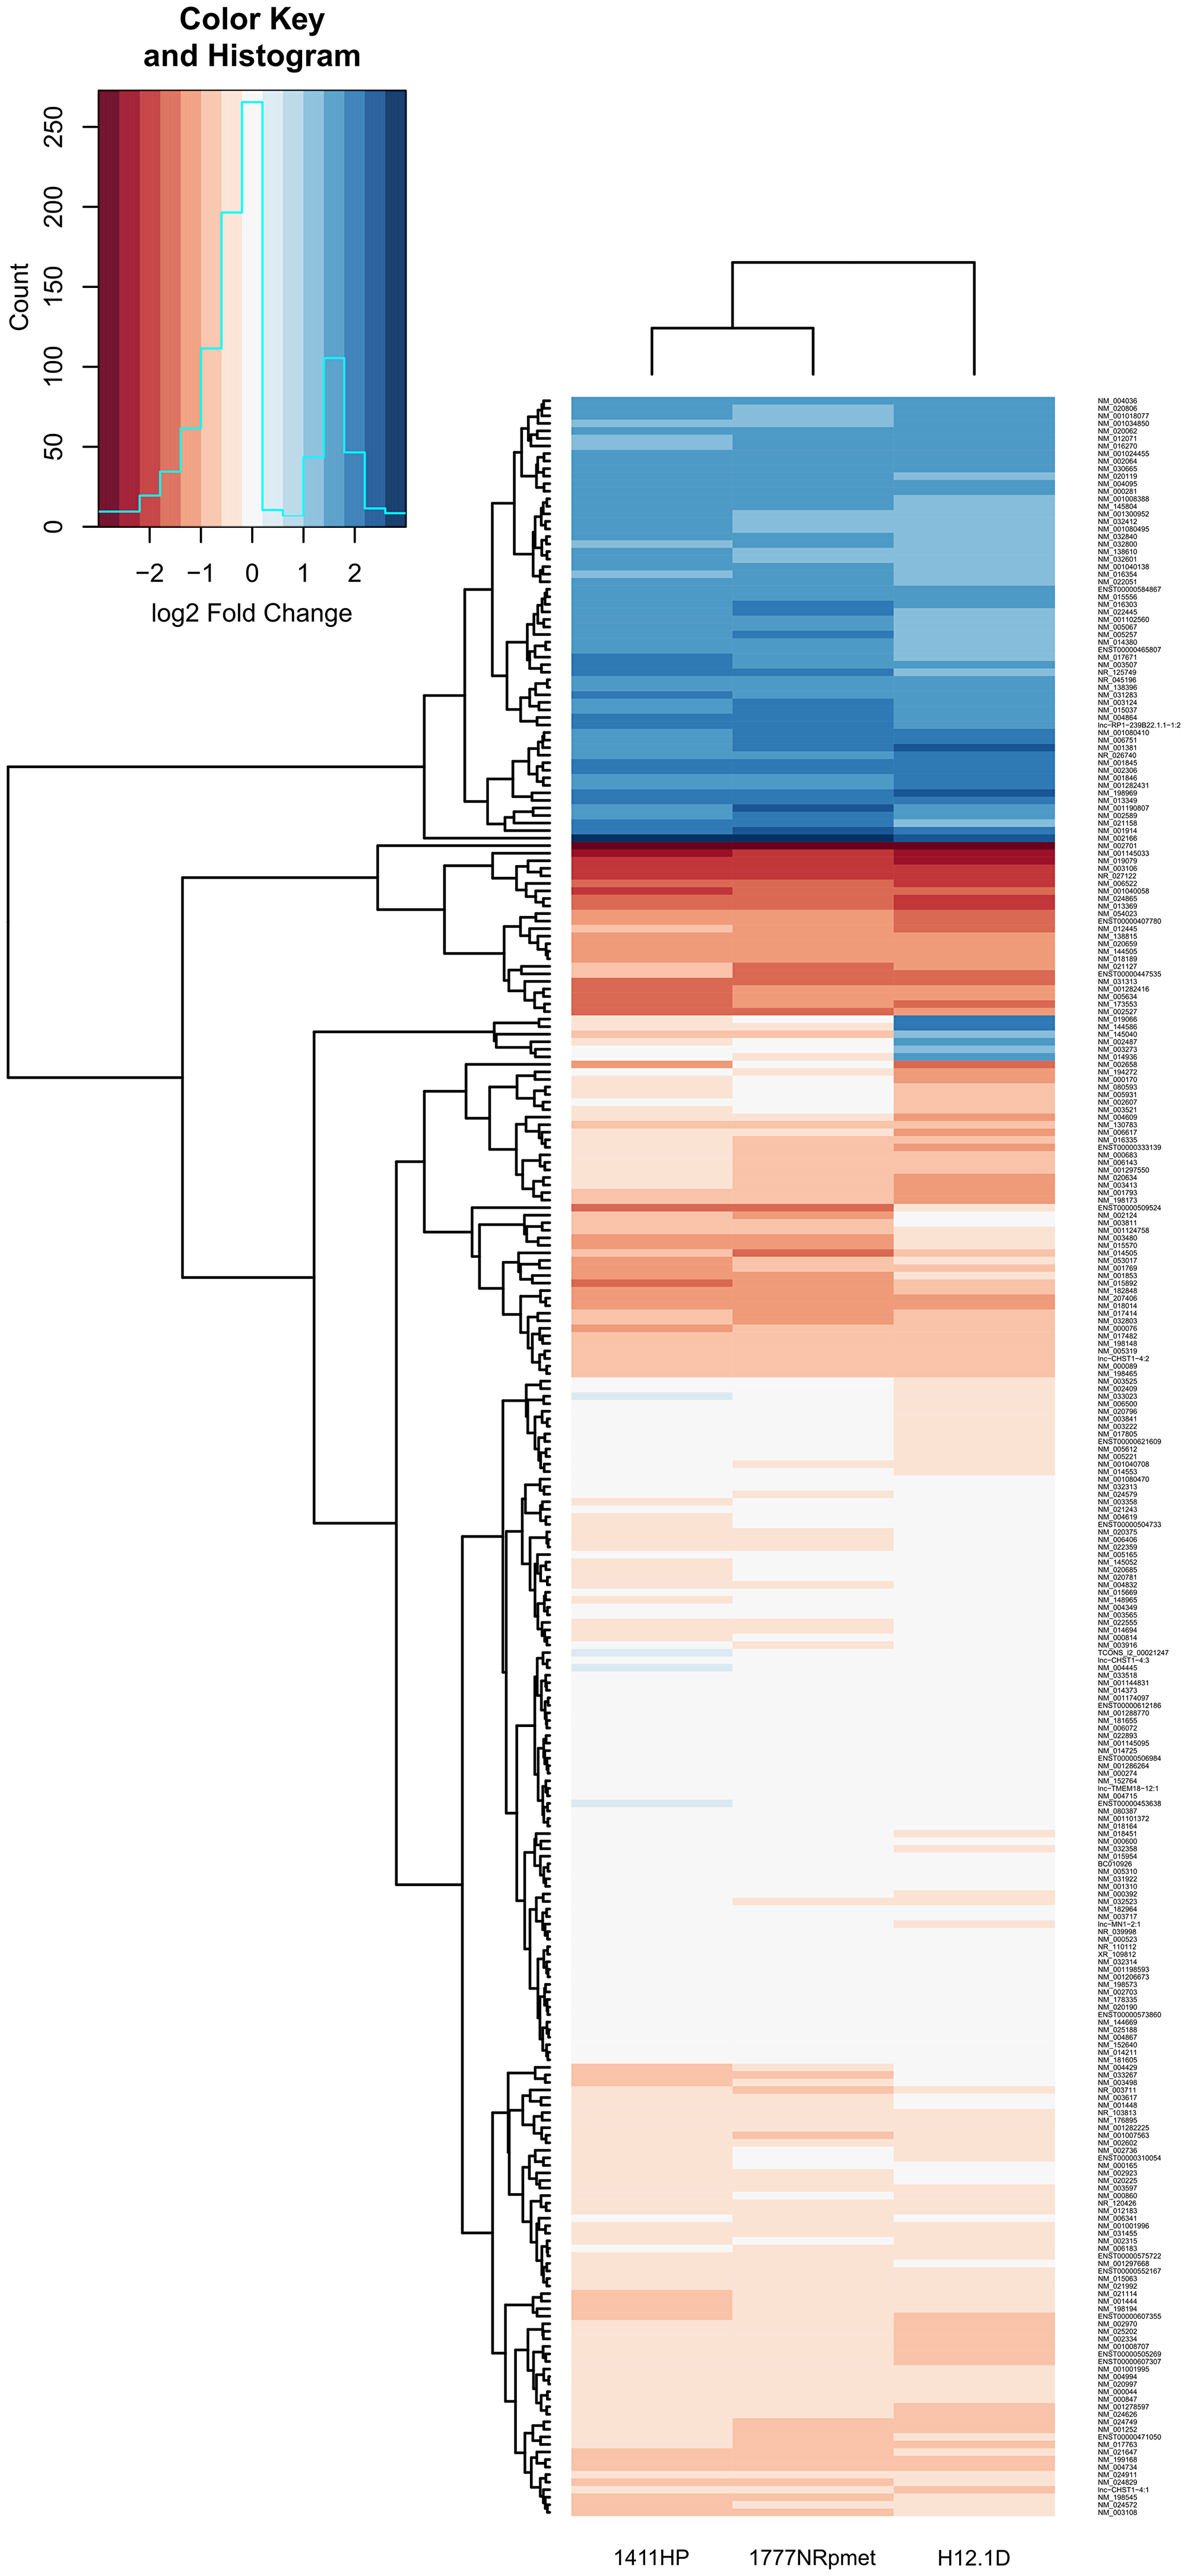 Differentially expressed genes in CDDP-resistant TGCT cell lines.